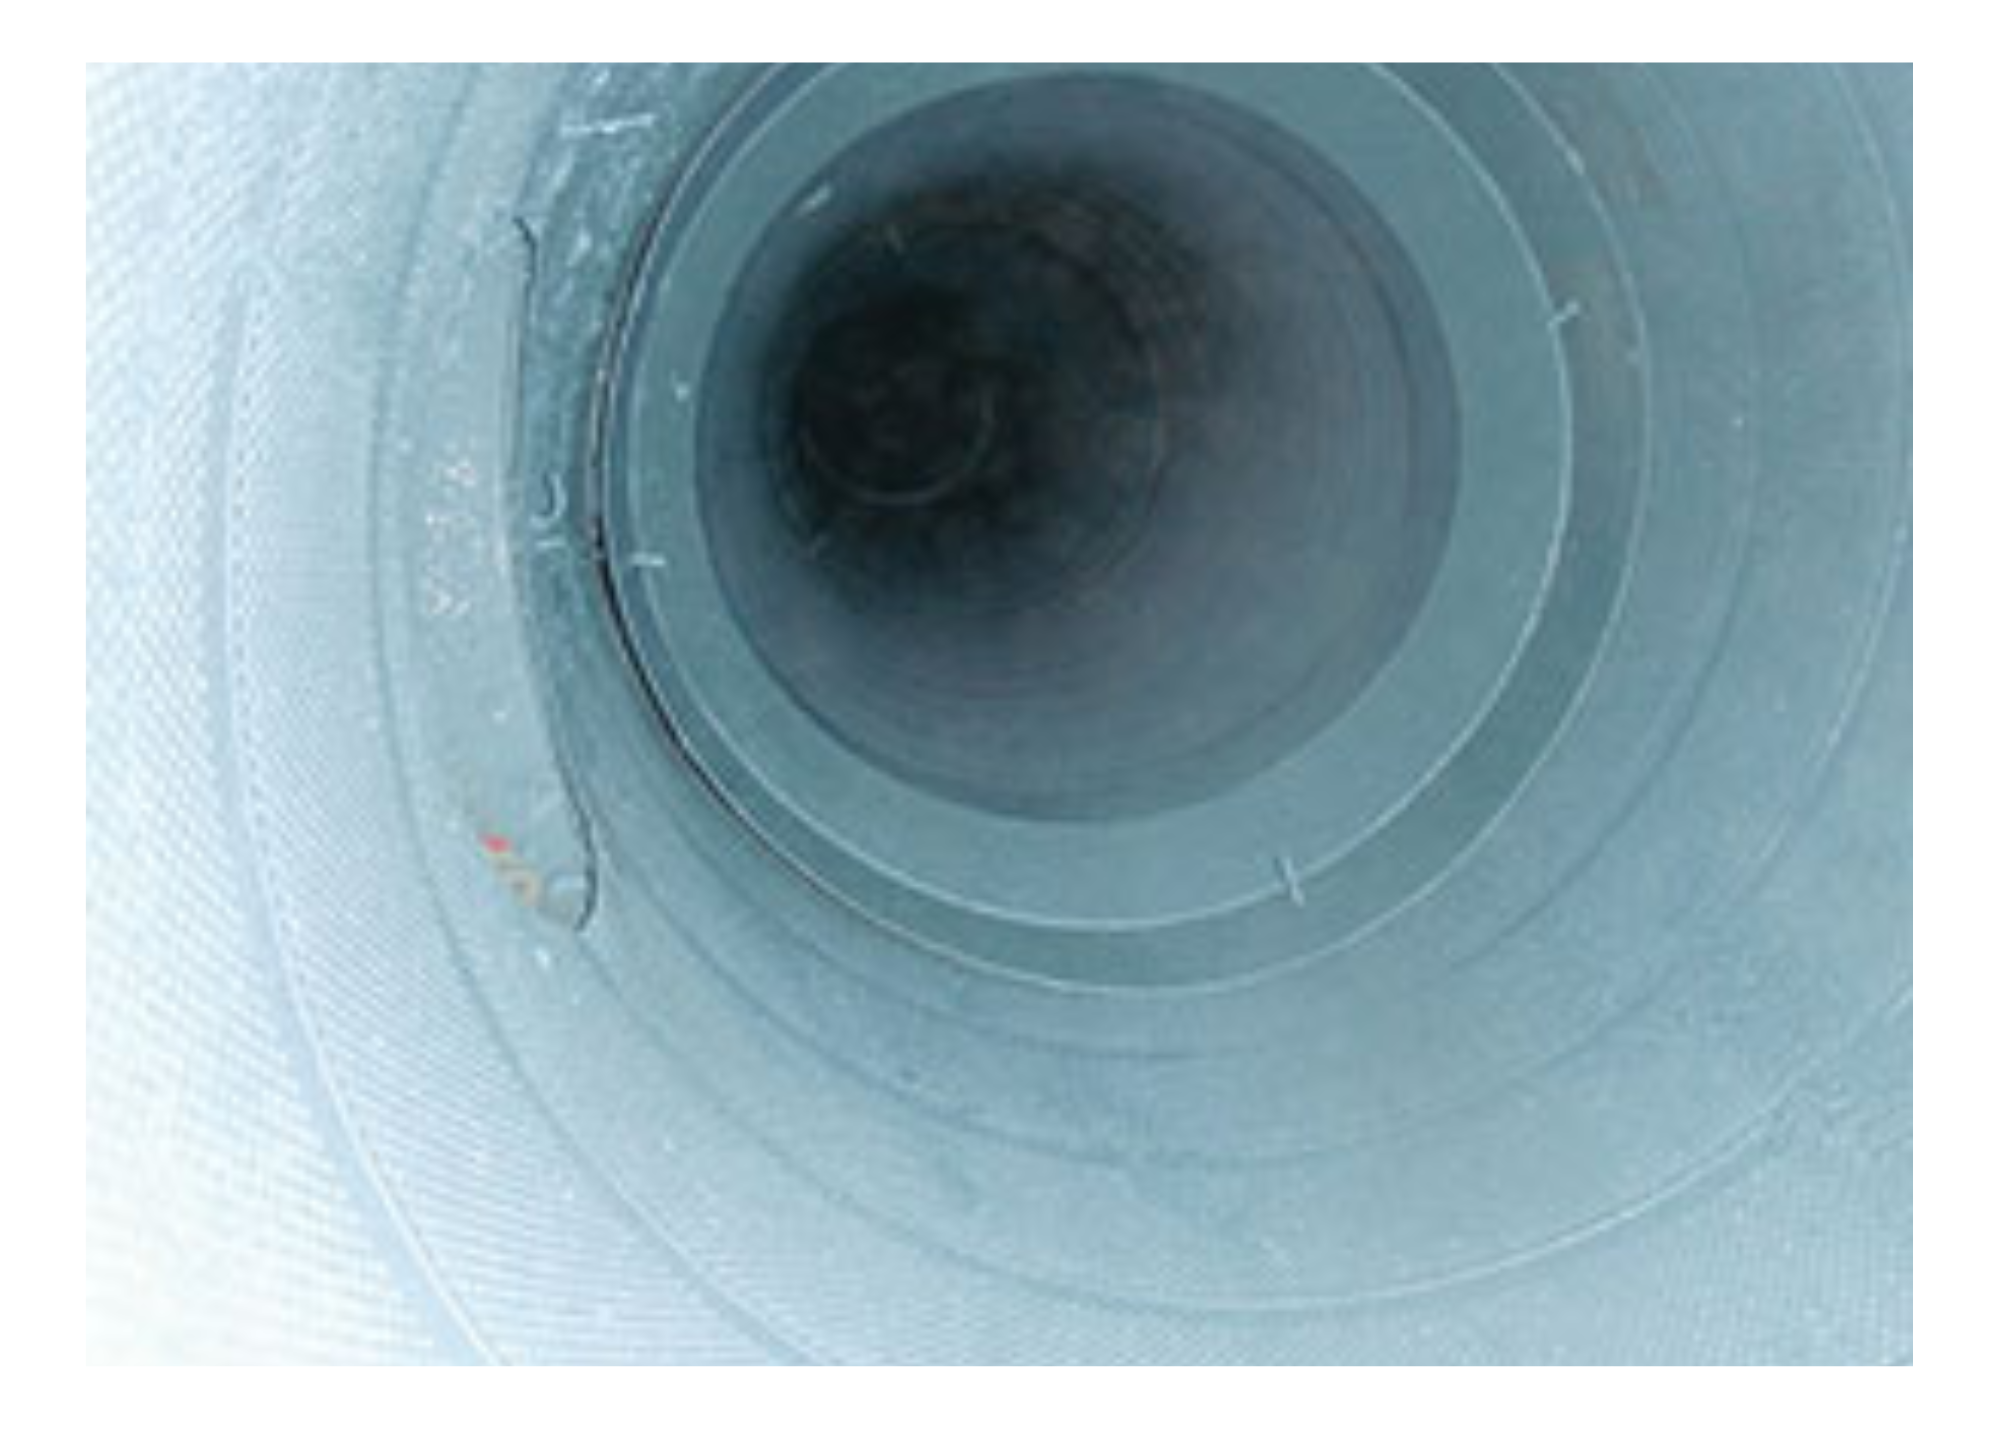 After ISAAC cleaned the facility’s ductwork (above), removing dirt and debris in a single pass, it was then used to apply a water-based duct sealant (below) engineered to seal joints and seams from inside the ductwork